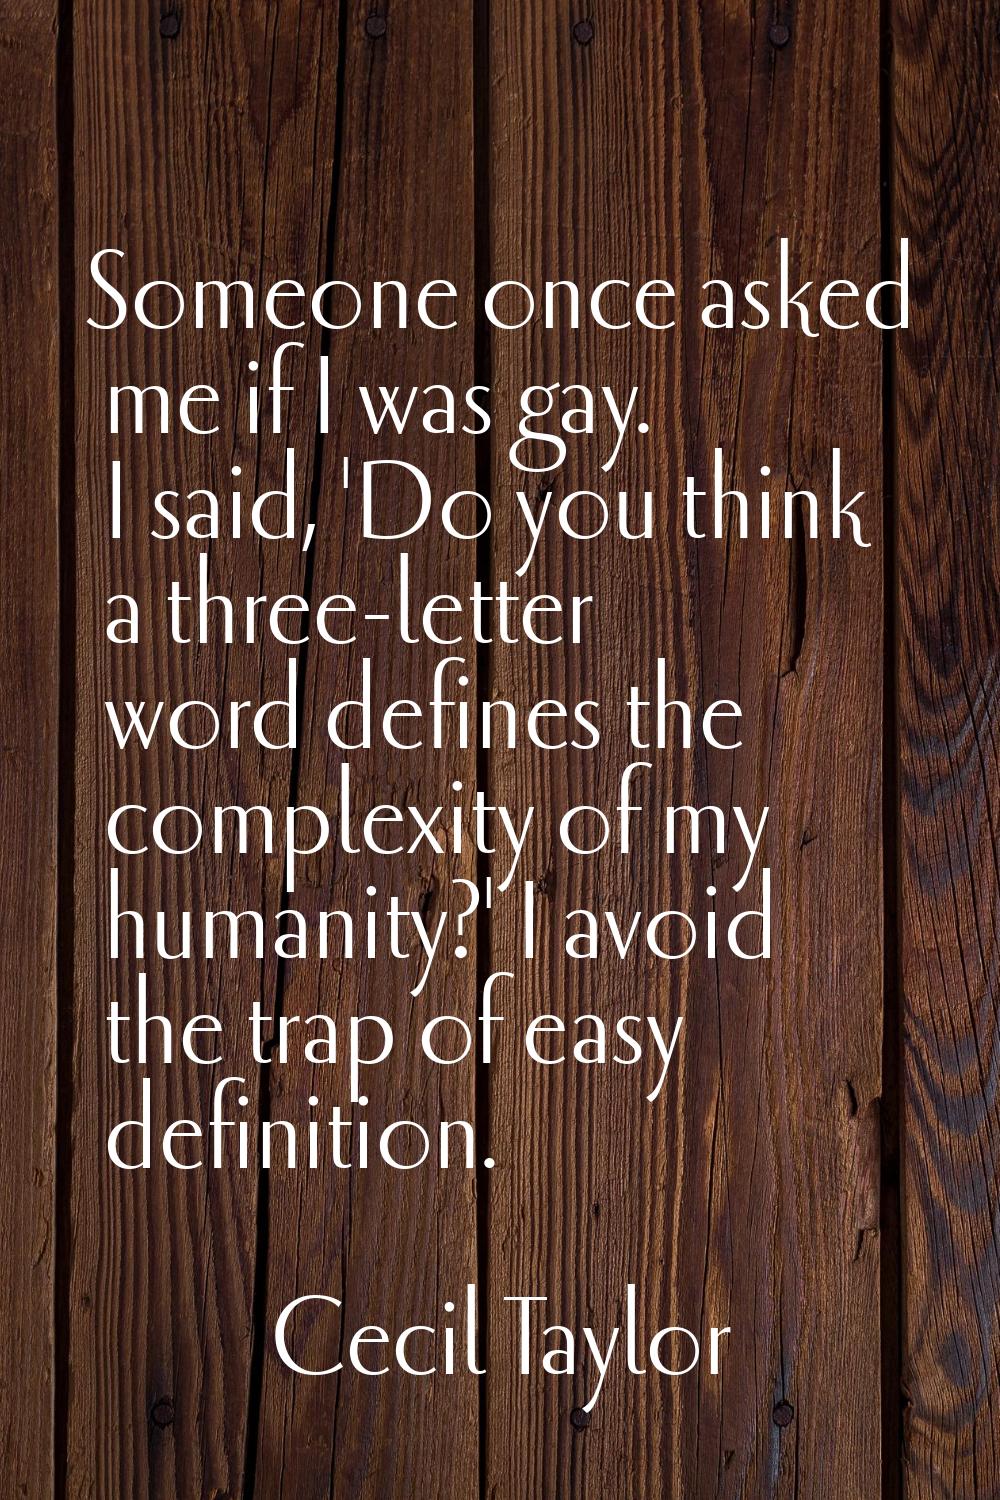 Someone once asked me if I was gay. I said, 'Do you think a three-letter word defines the complexit